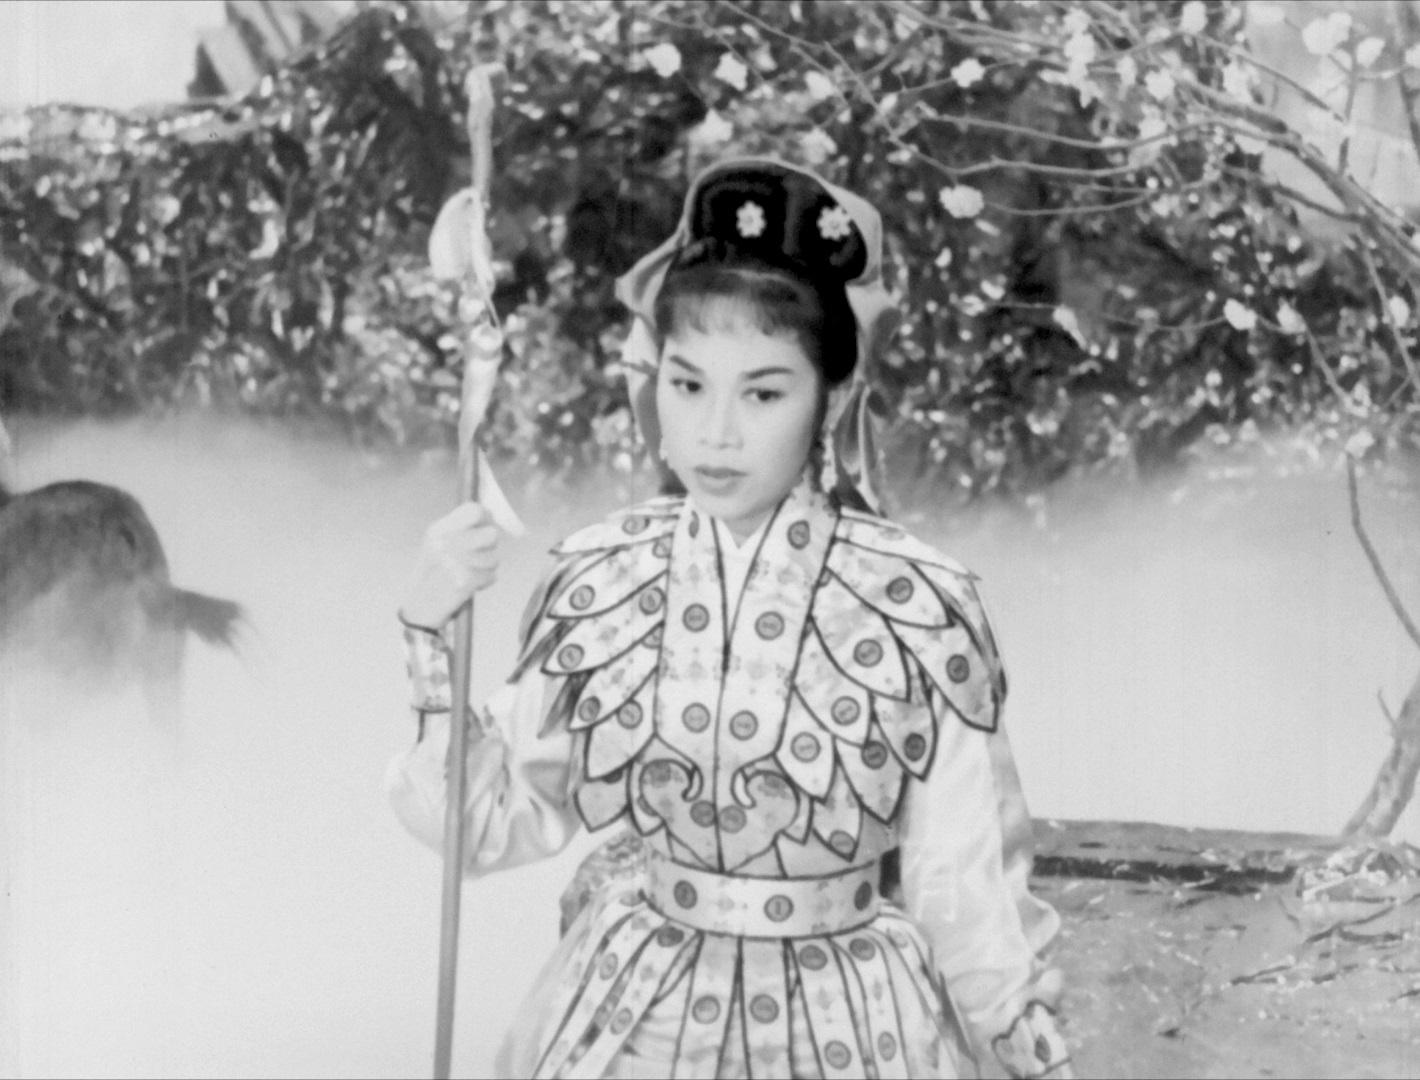 The Hong Kong Film Archive of the Leisure and Cultural Services Department will feature Fong Yim-fan as part of the "Morning Matinee" series from July to December. Eighteen of her movies will be screened at 11am on every Friday, enabling film lovers to revisit the superb acting skills of the Queen of Huadan (female lead). Photo shows a film still of "The Fairy Shepherdess" (1958).